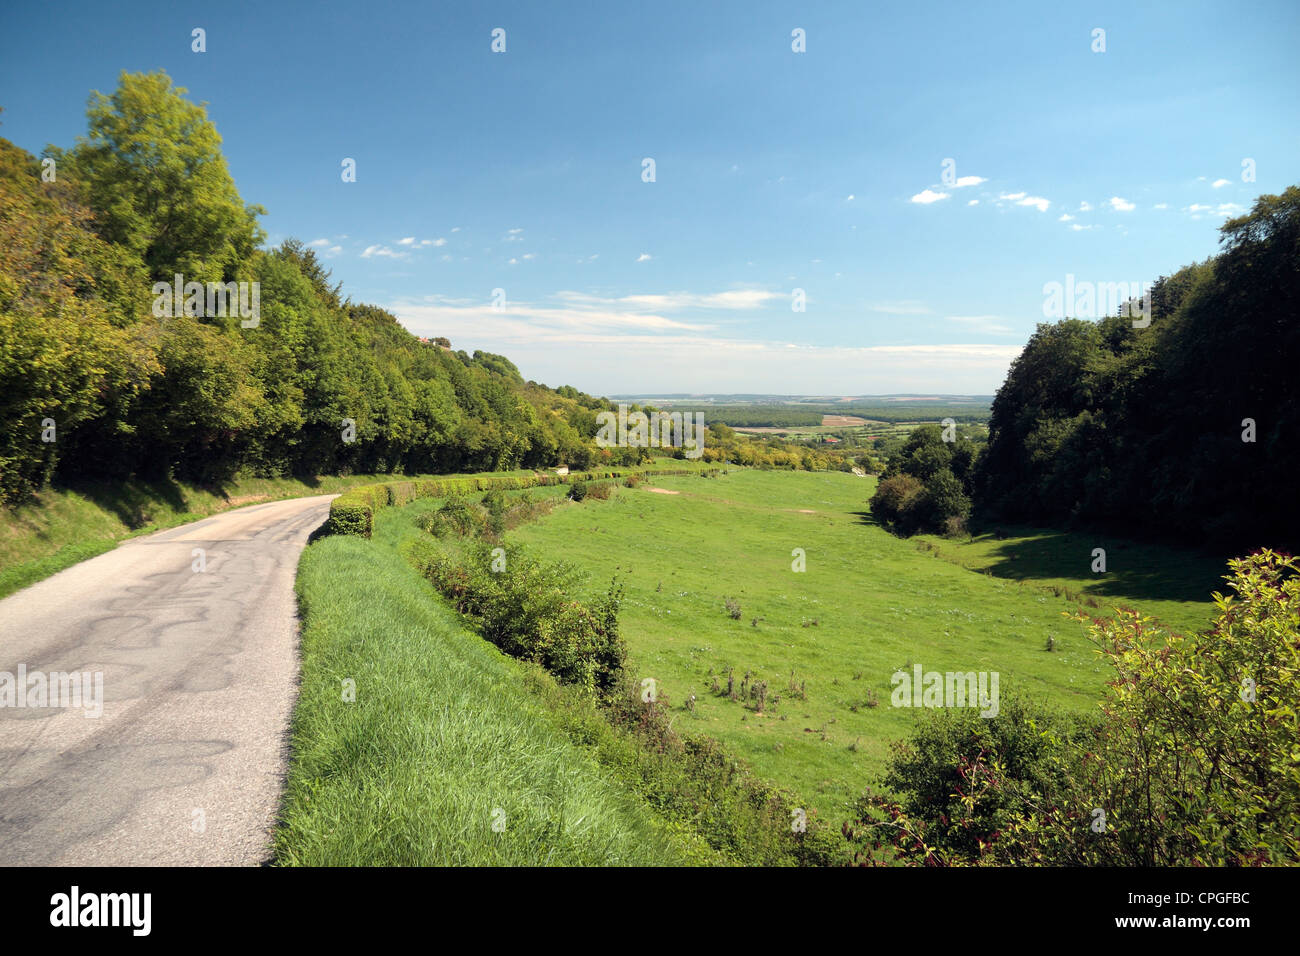 General view along D179 looking approx north-east leading into the small village of Vigneulles-lès-Hattonchâtel, France. Stock Photo